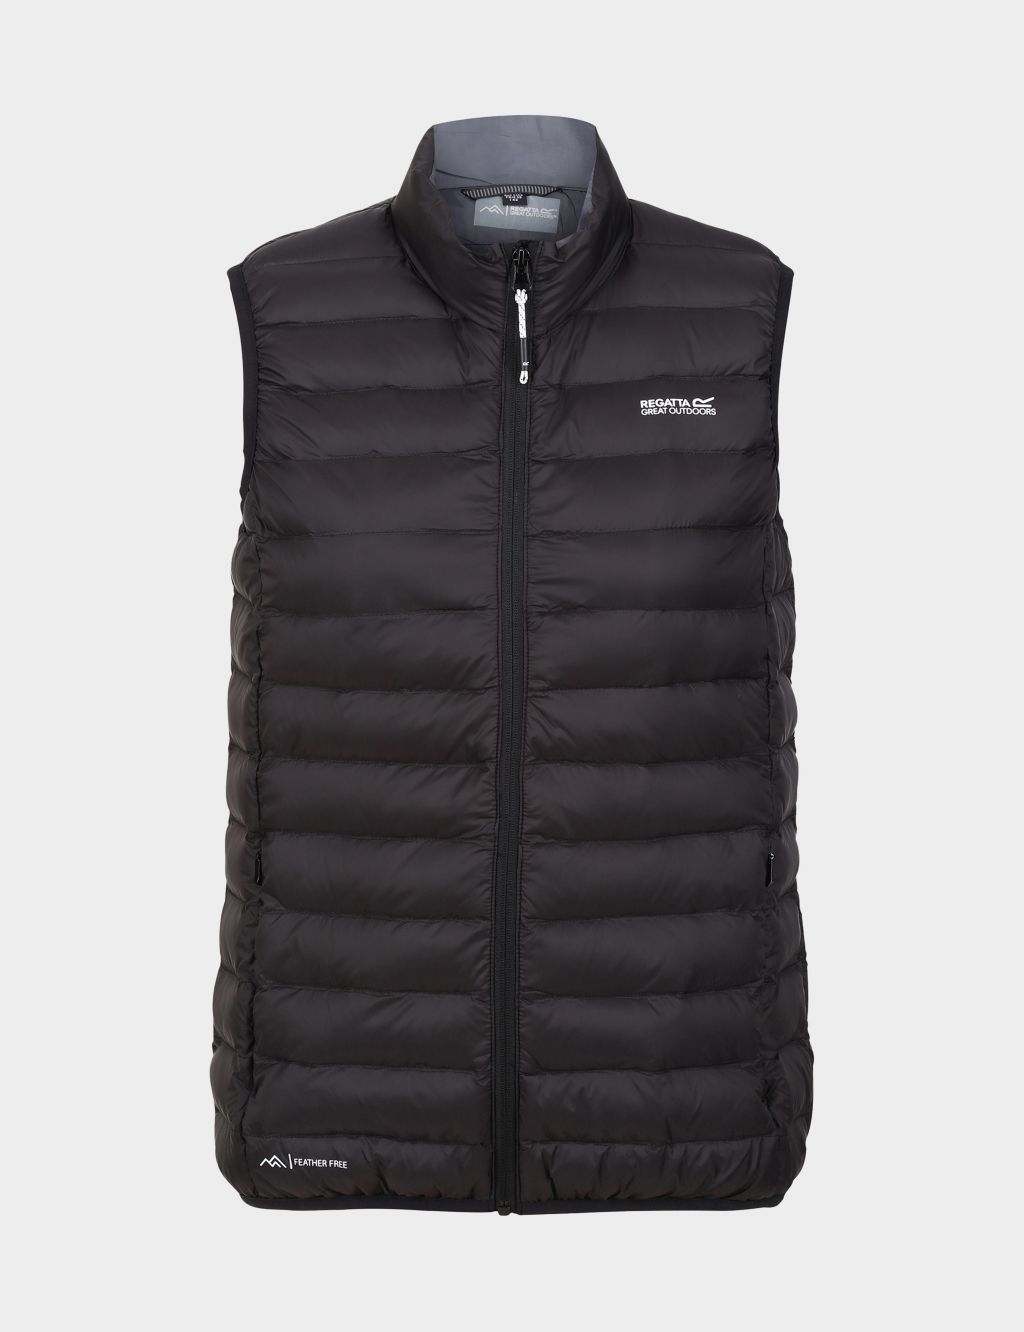 Marizion Water-Repellent Gilet image 2